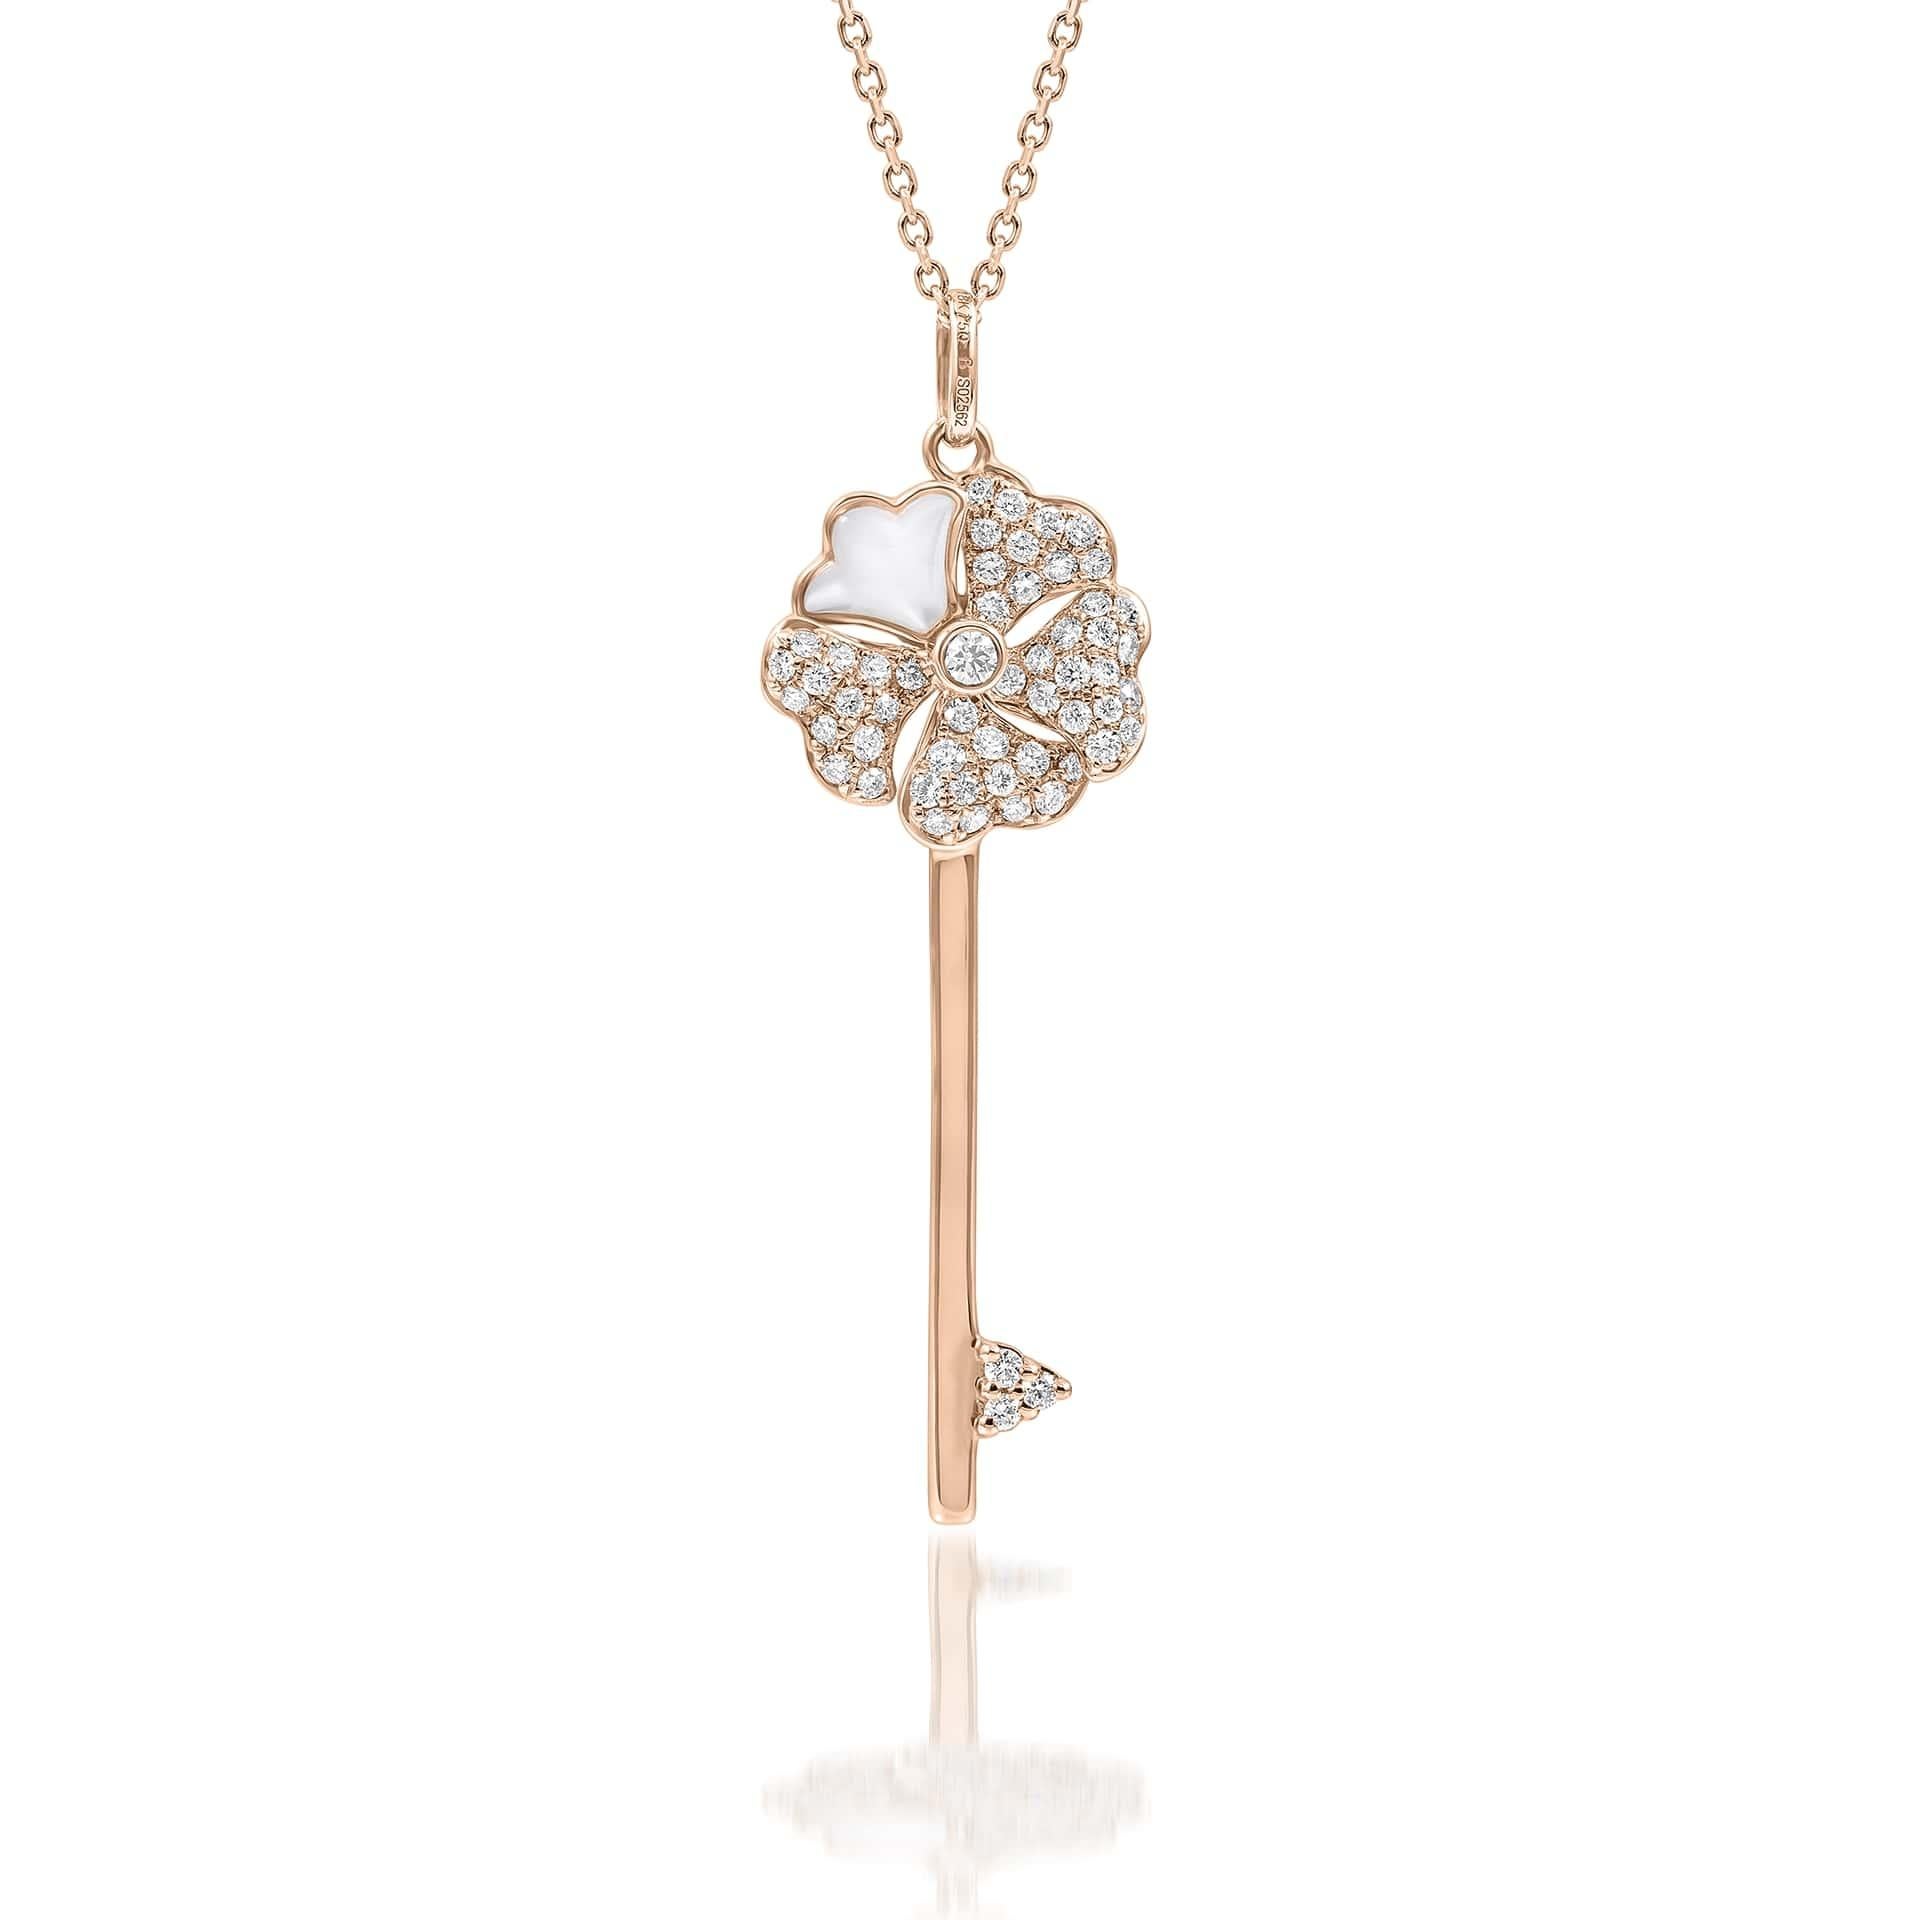 Bloom Diamond Key Necklace with Mother-of-Pearl in 18K Rose Gold

Inspired by the exquisite petals of the alpine cinquefoil flower, the Bloom collection combines the richness of diamonds and precious metals with the light versatility of this